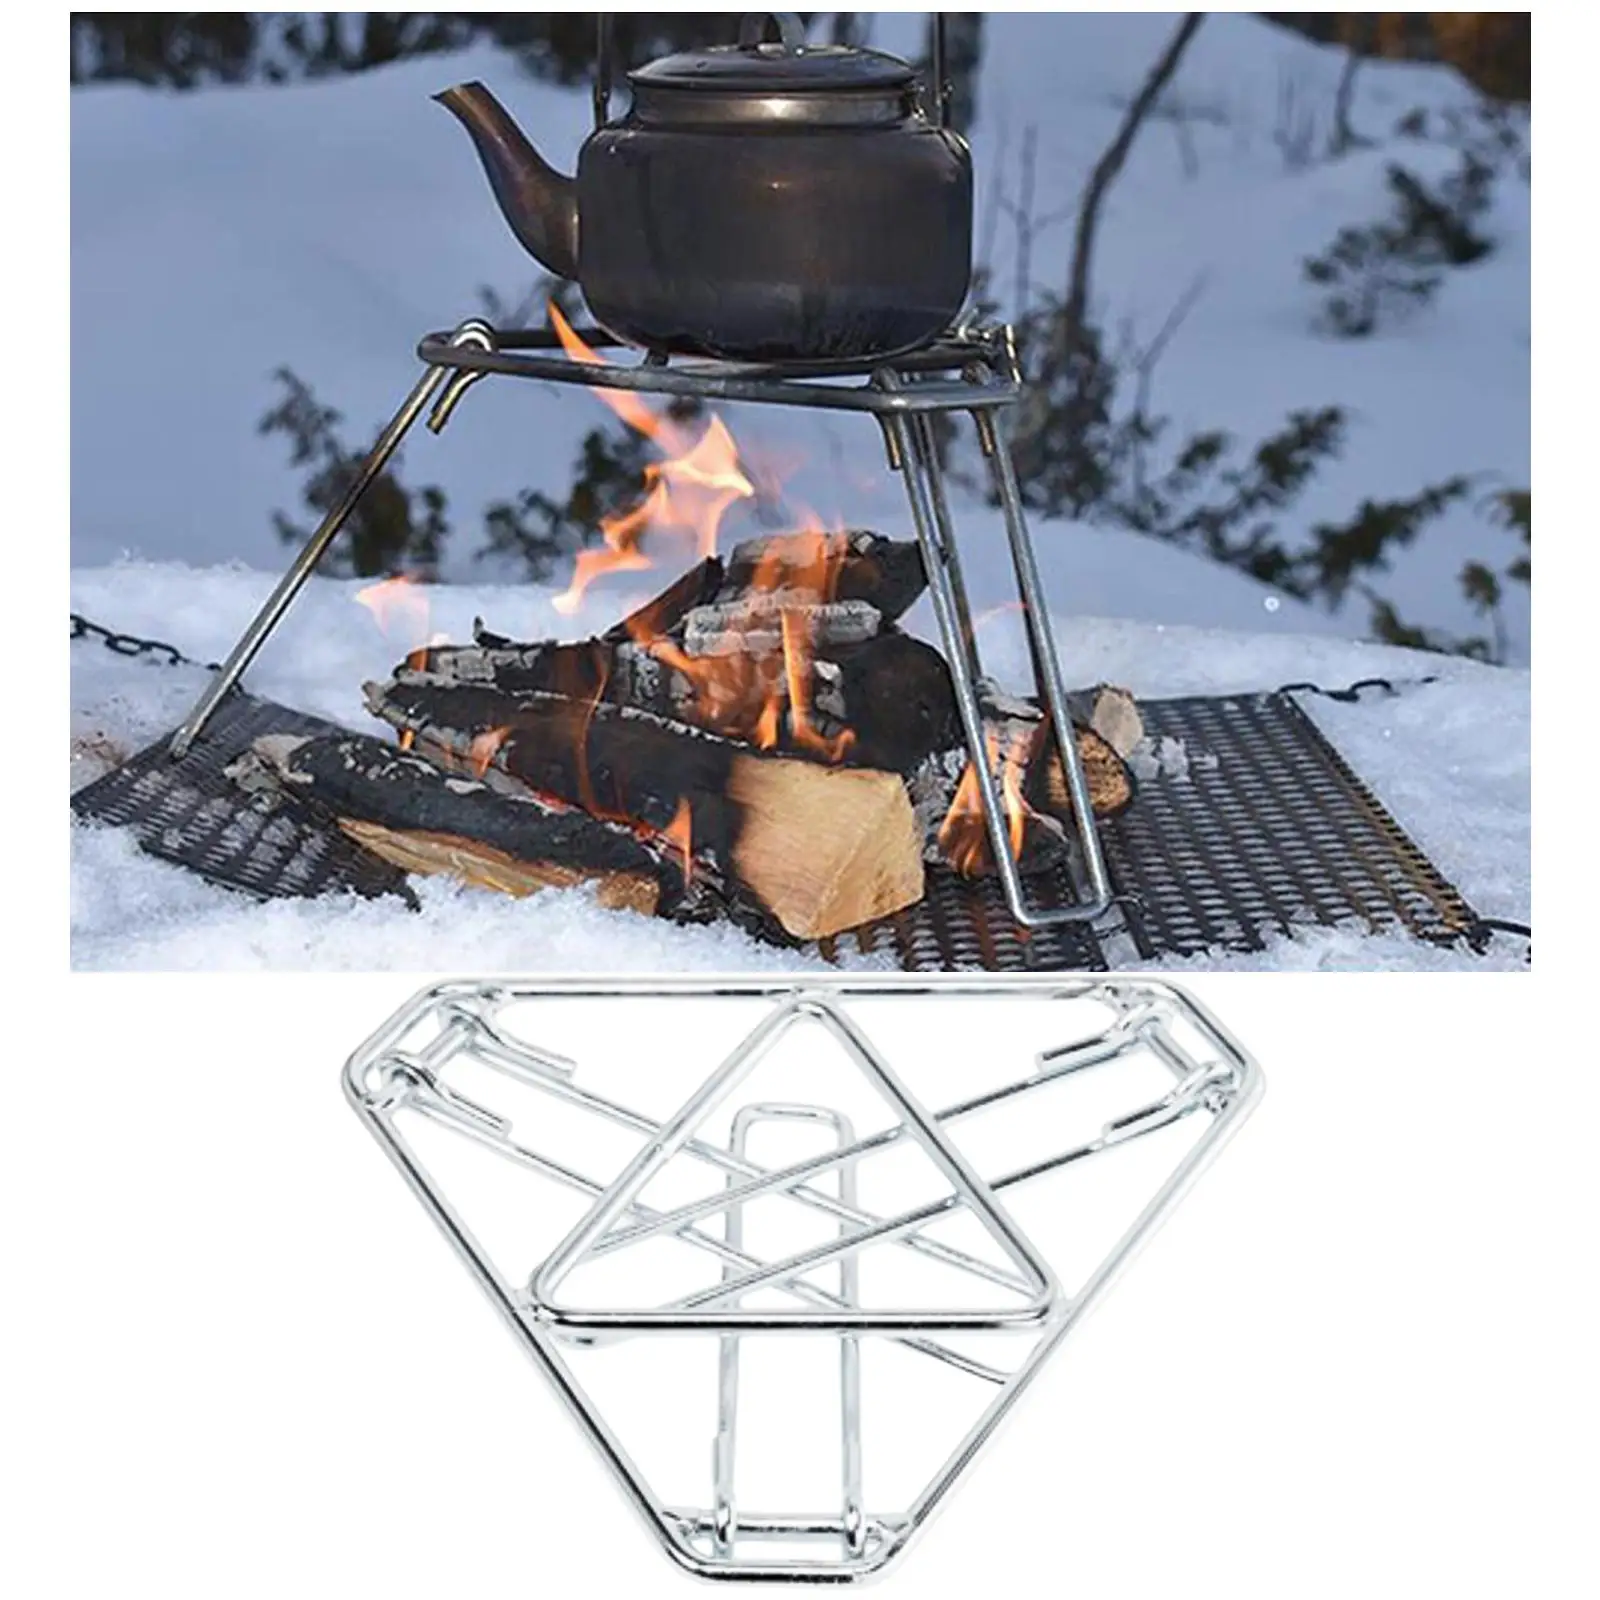 Convenient Stove Holder Outdoor Camping Hiking Alcohol Stove Rack Ultralight Folding Pot Burner Stand Camp Cooking Supplies